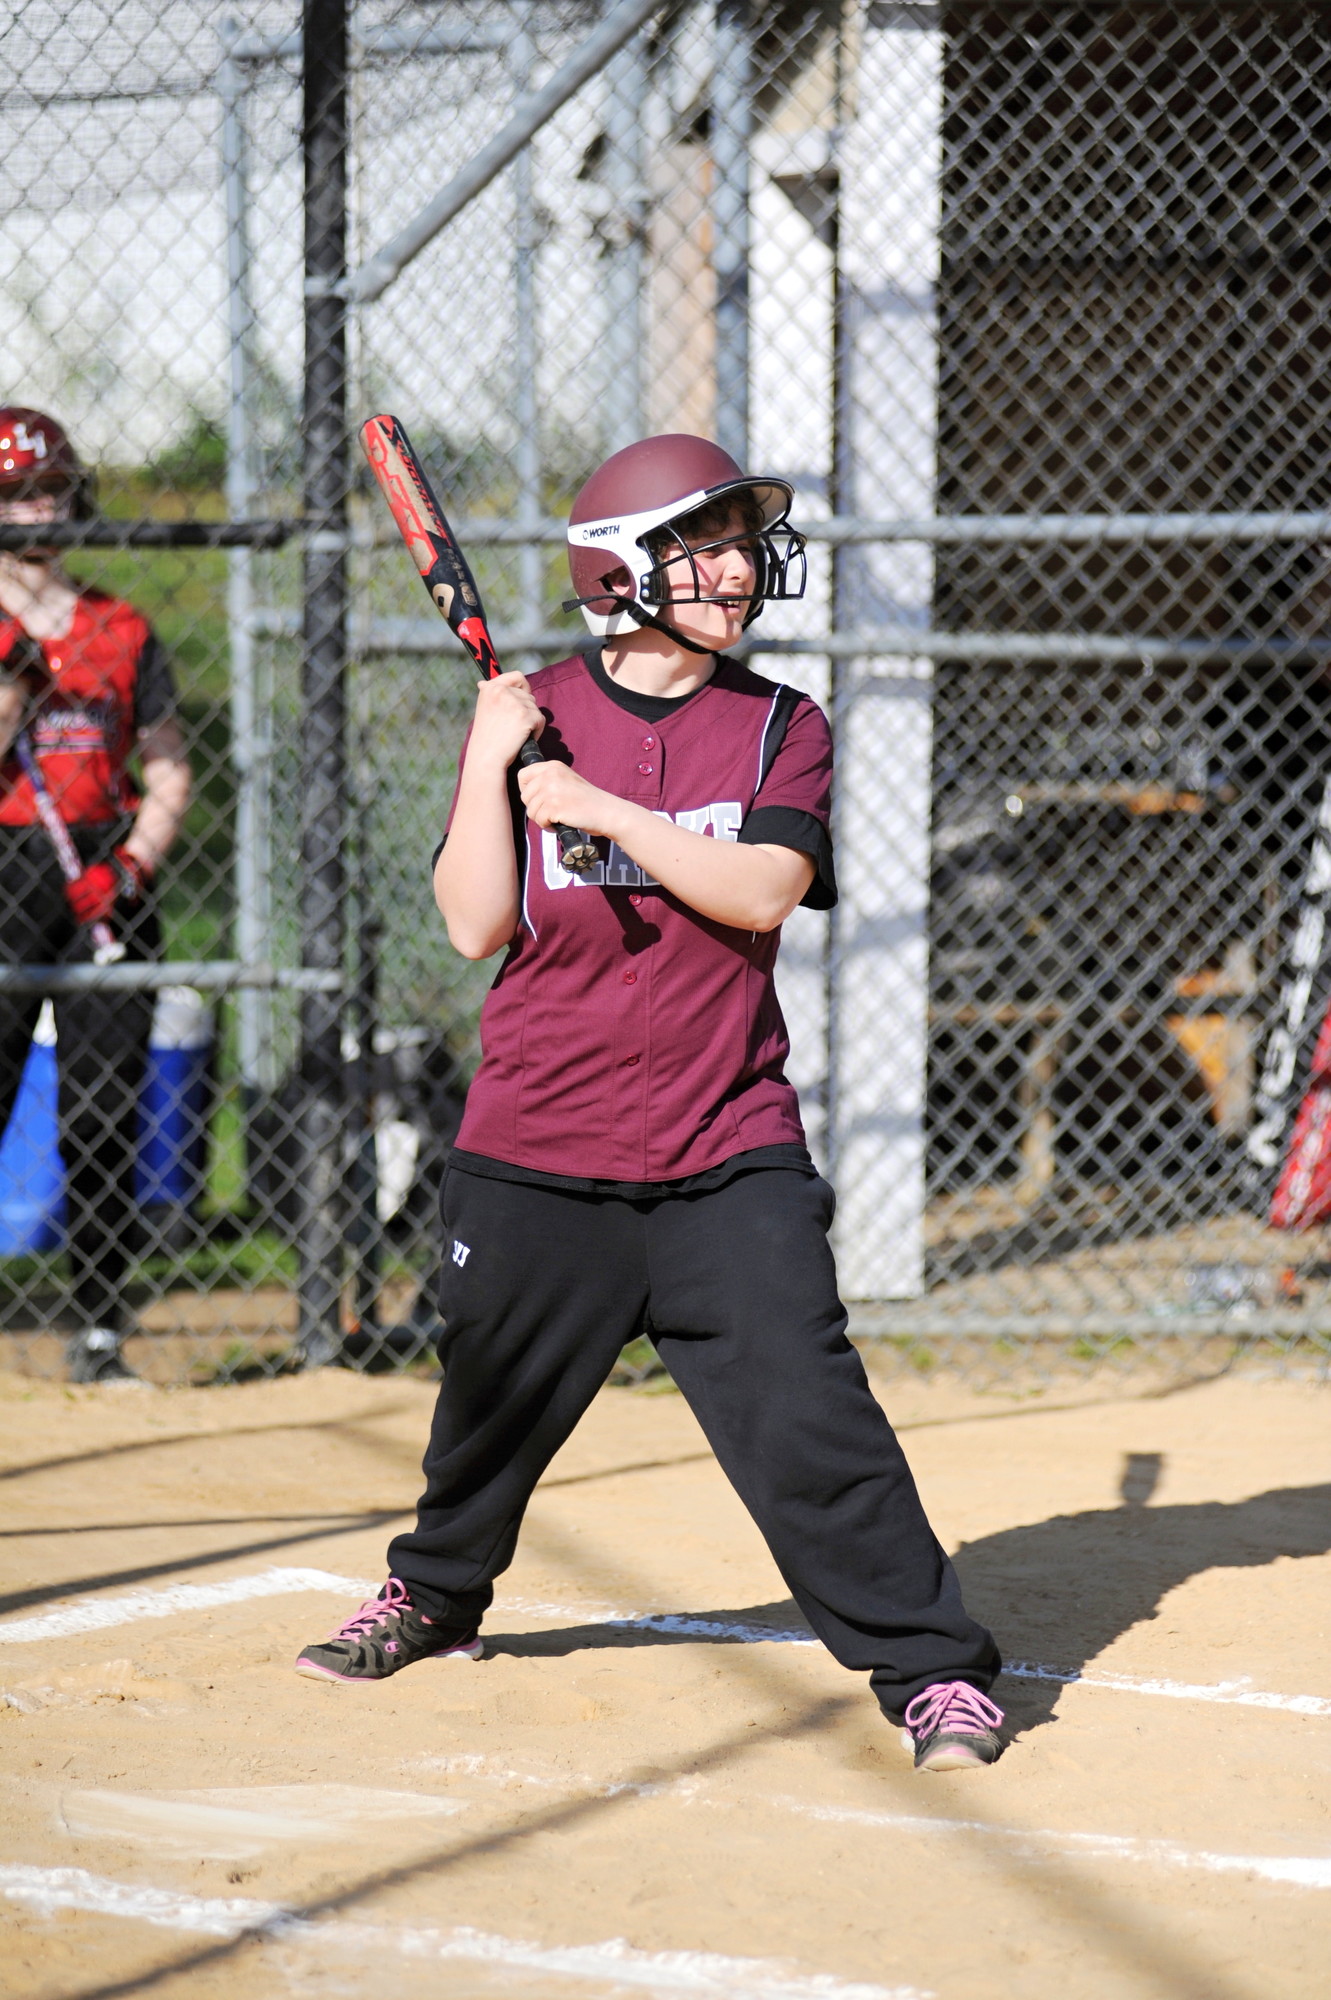 Shelby Soodek, a Clarke senior who has autism, had a turn at the plate during the Lady Rams’ final regular-season home game on May 8.